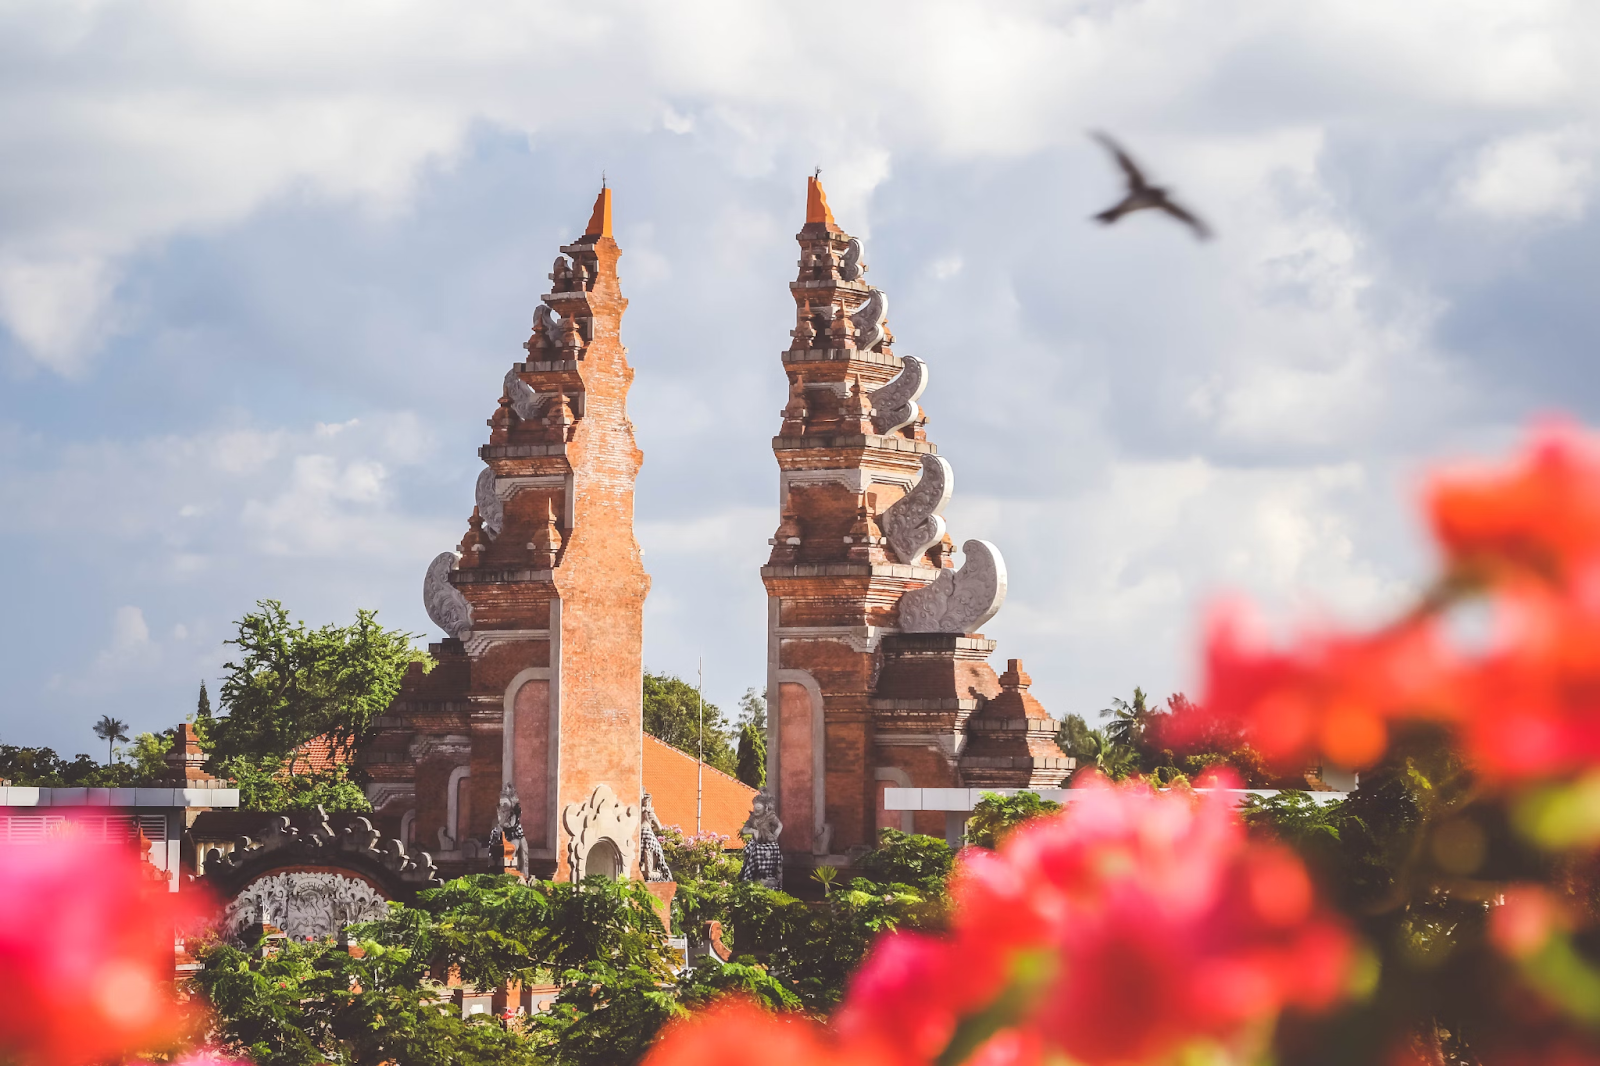 A traditional Balinese gate stands majestically against a backdrop of a cloudy sky. The twin red-brick structures are adorned with intricate carvings and floral decorations. In the foreground, vibrant pink flowers blur into the frame, adding a splash of color to the scene.